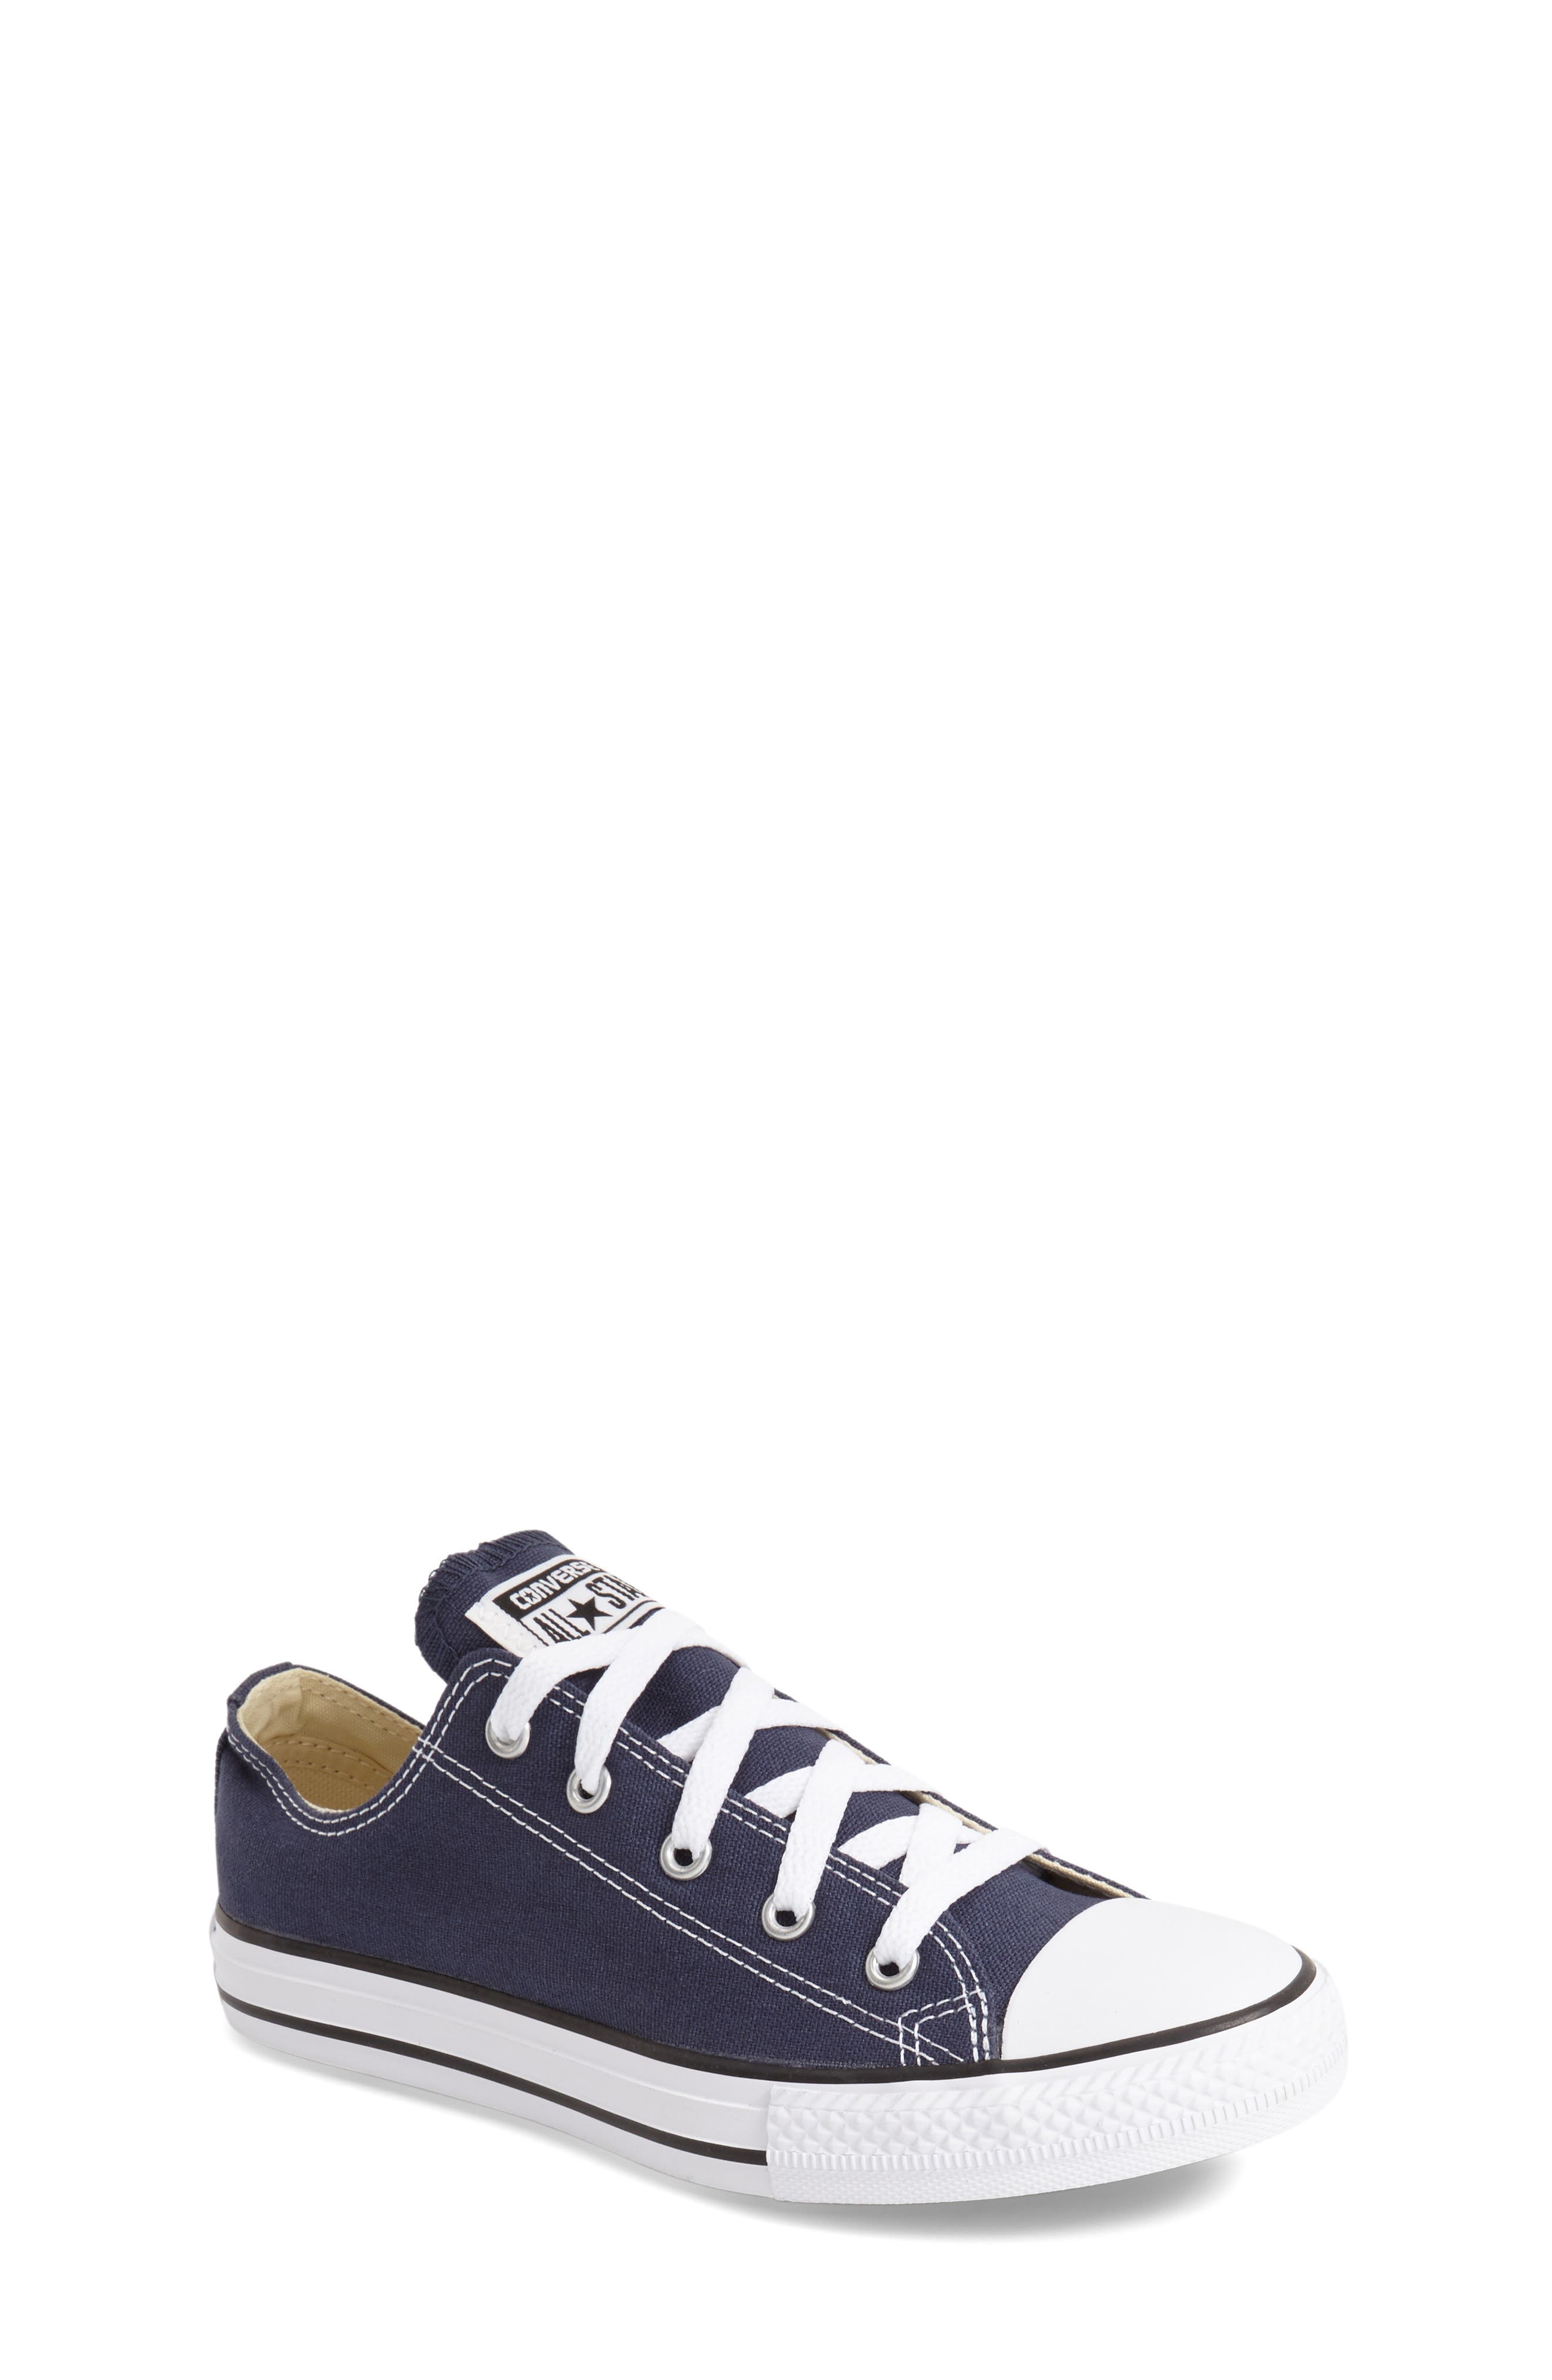 UPC 022866377508 product image for Converse Chuck Taylor(R) Sneaker in Navy at Nordstrom, Size 12 M | upcitemdb.com